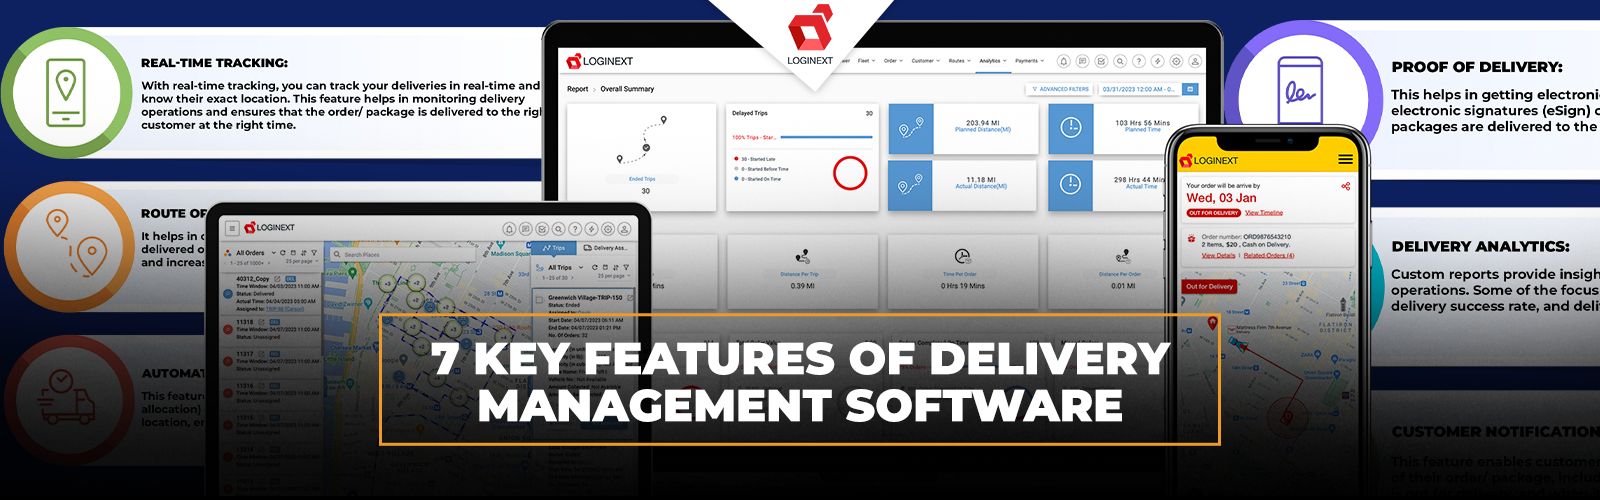 Delivery Management Software - 7 Key Features Infographic